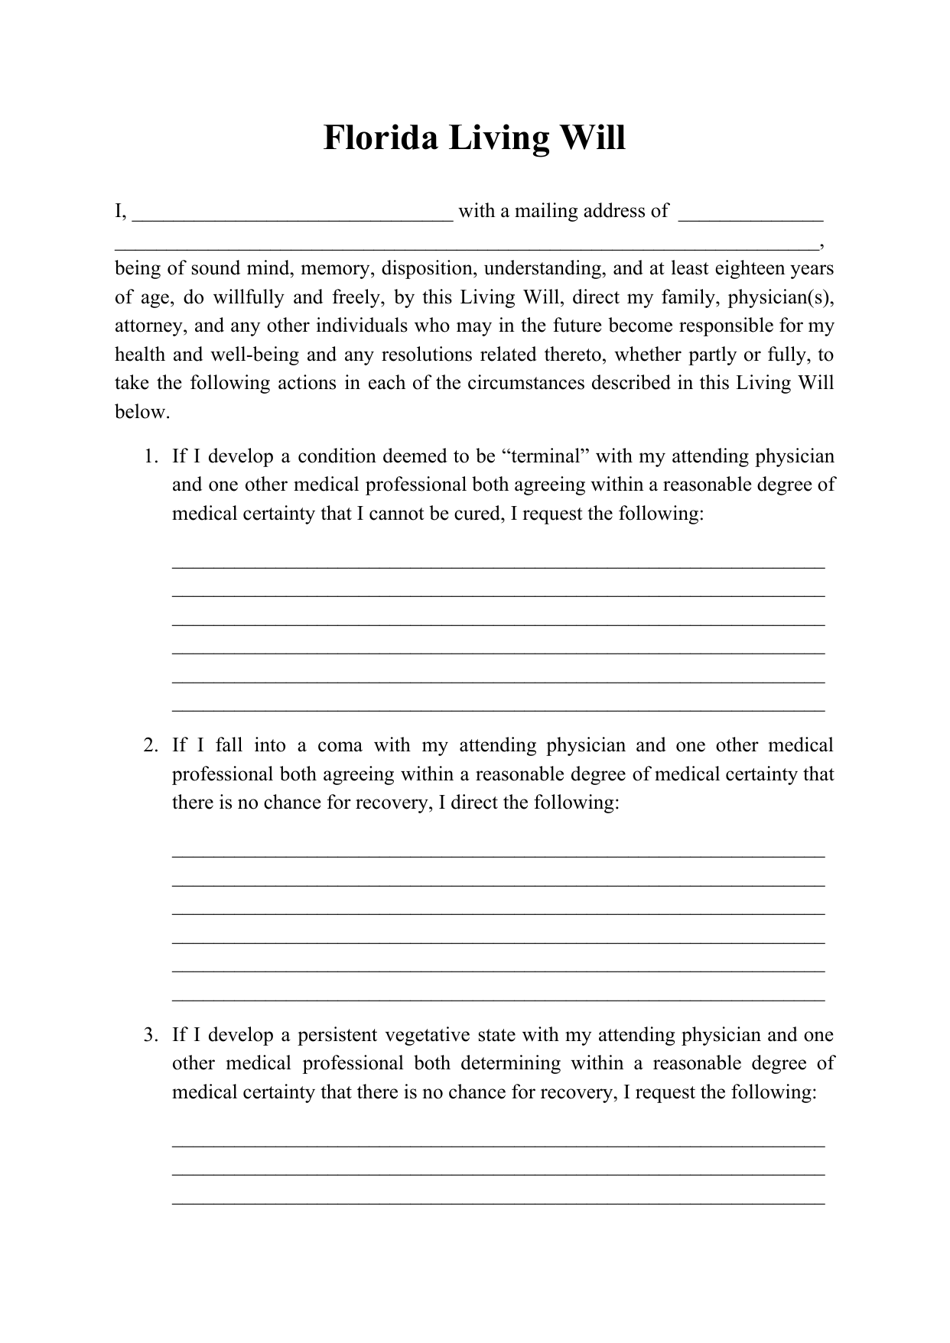 florida-living-will-form-fill-out-sign-online-and-download-pdf